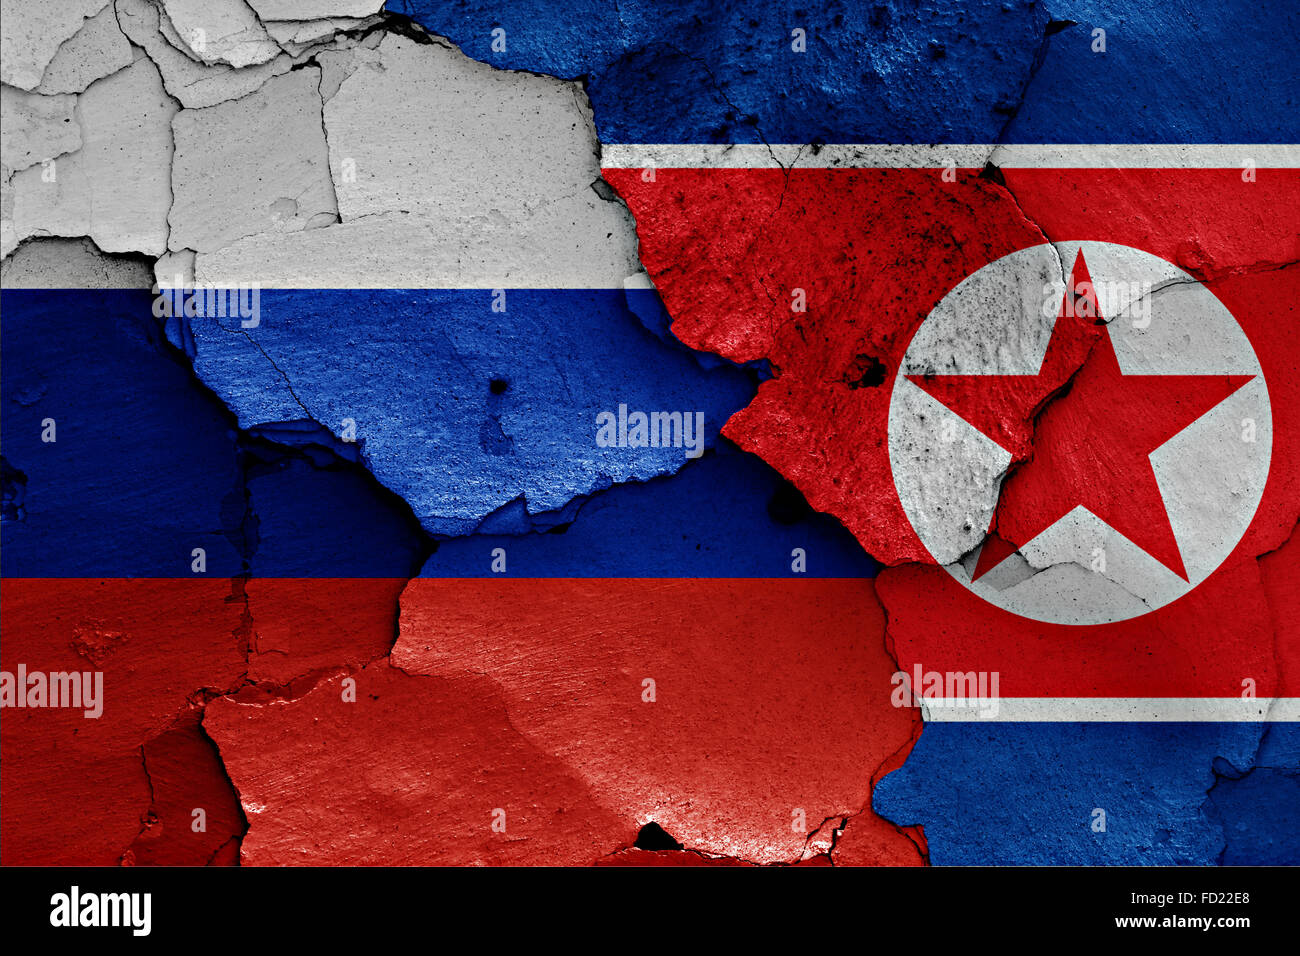 flags of Russia and North Korea painted on cracked wall Stock Photo